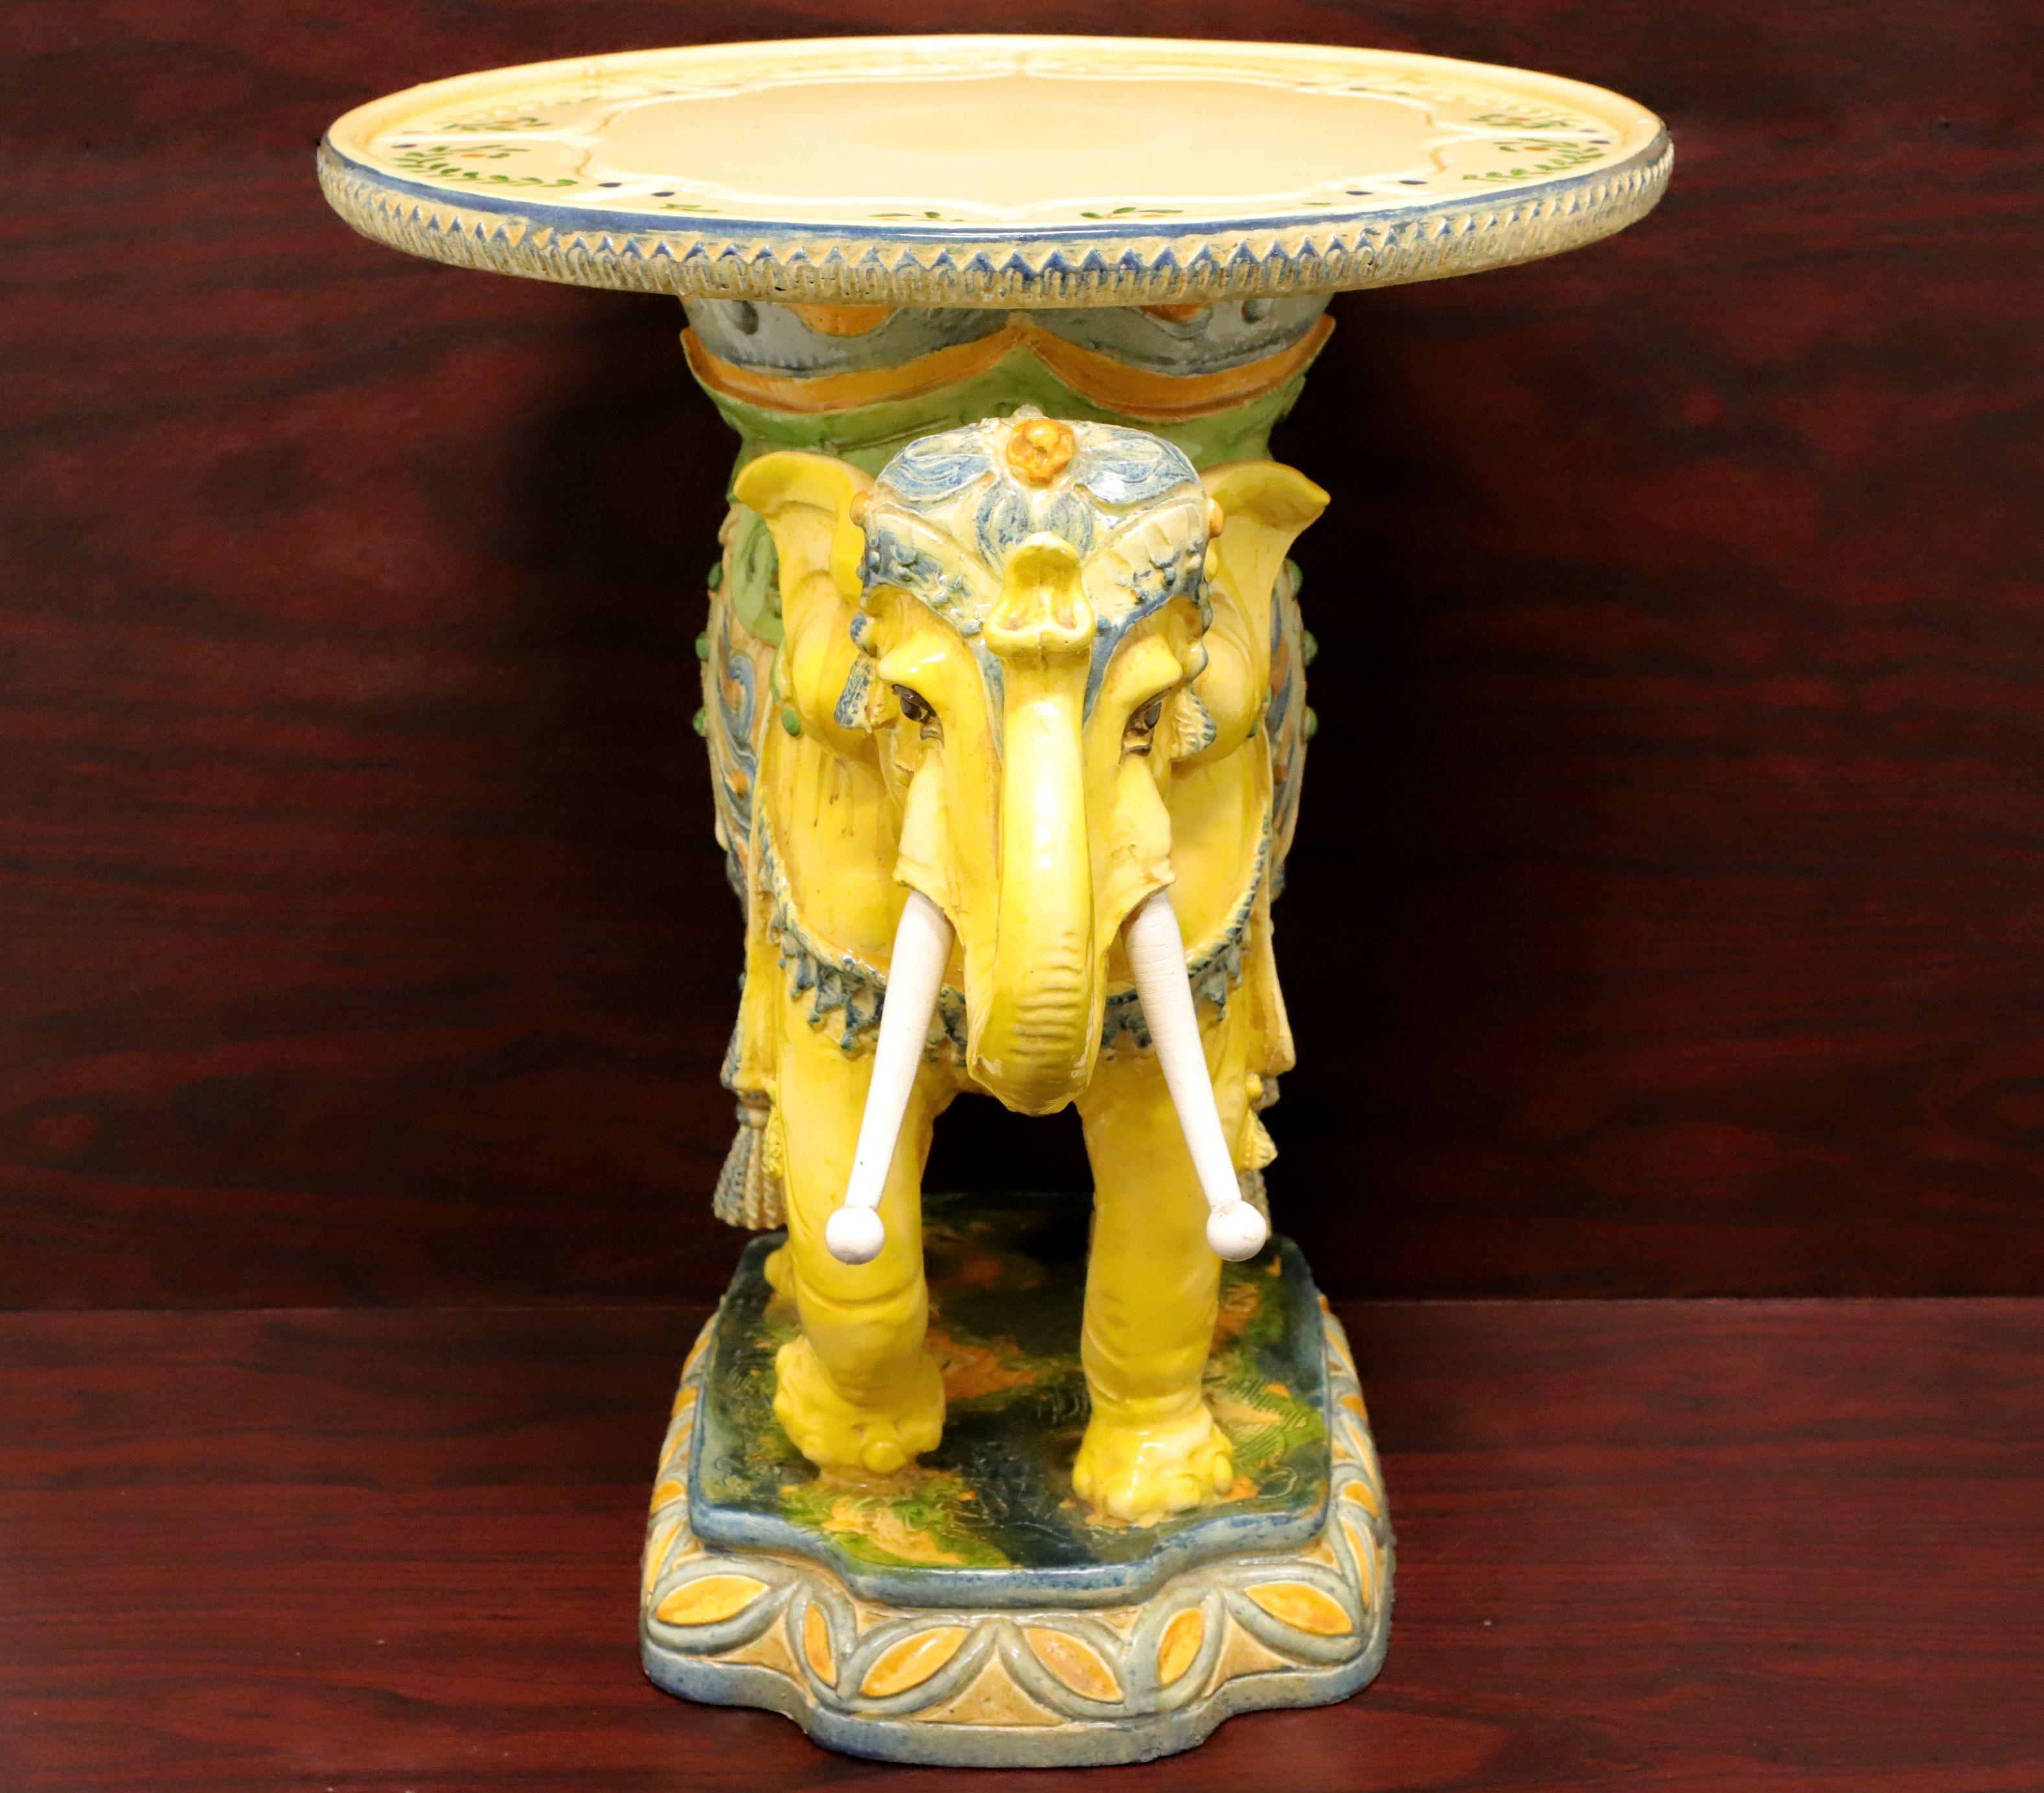 A ceramic plant stand in the Hollywood Regency style depicting an elegantly dressed elephant with a round flat surface top ideal for a plant. Unsigned, artist unknown. Multi-colored, mostly shades of yellow, blue, green & orange, ceramic, glazed and